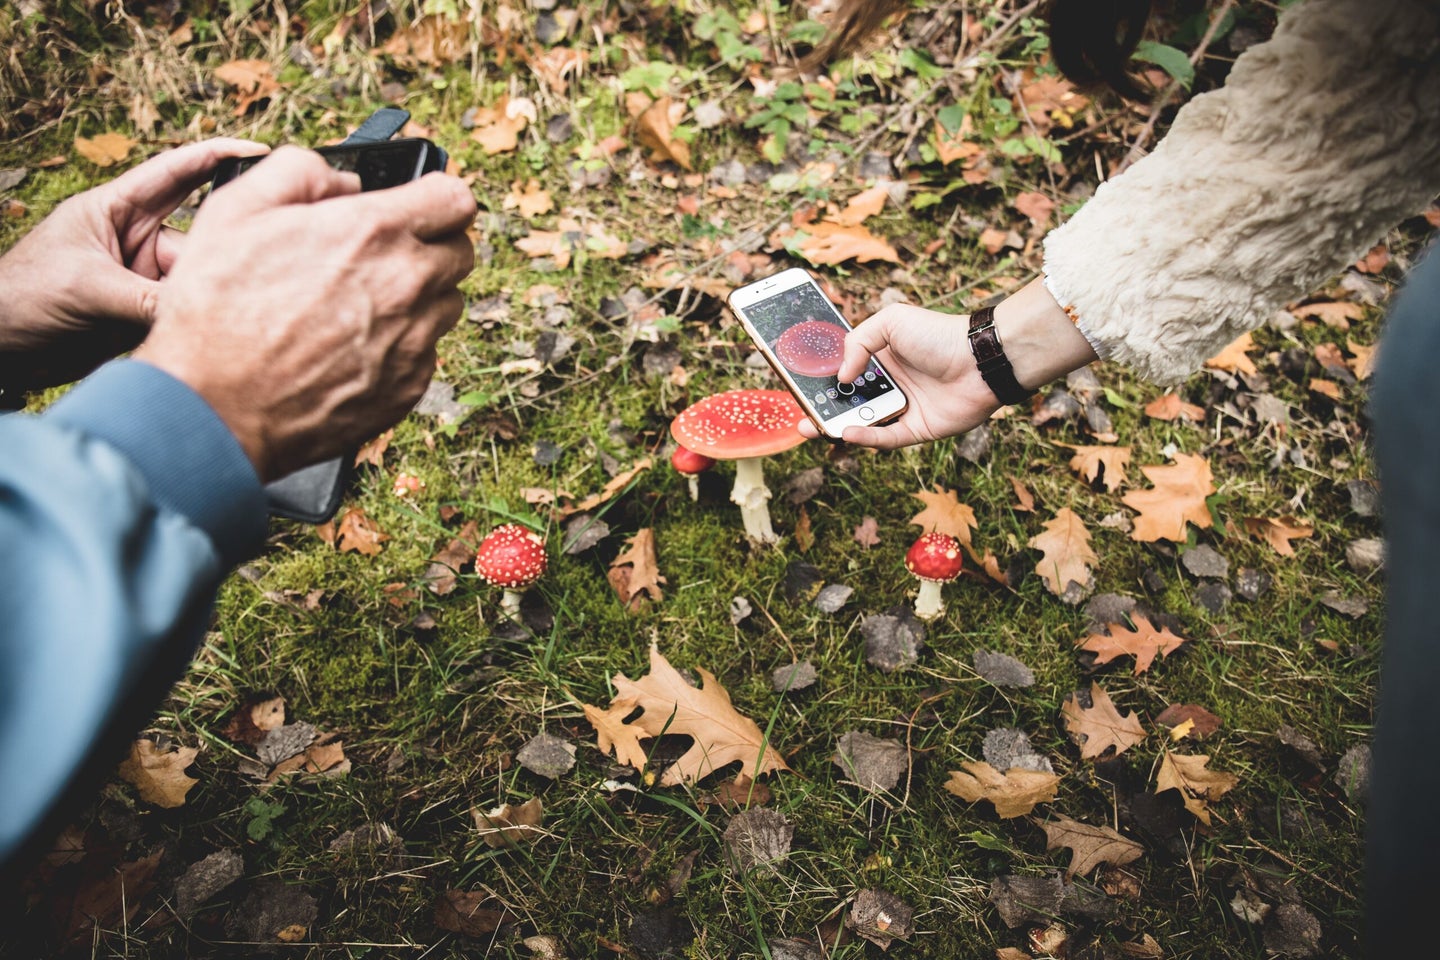 two pairs of hands holding camera and phone to take photo of mushroom in field